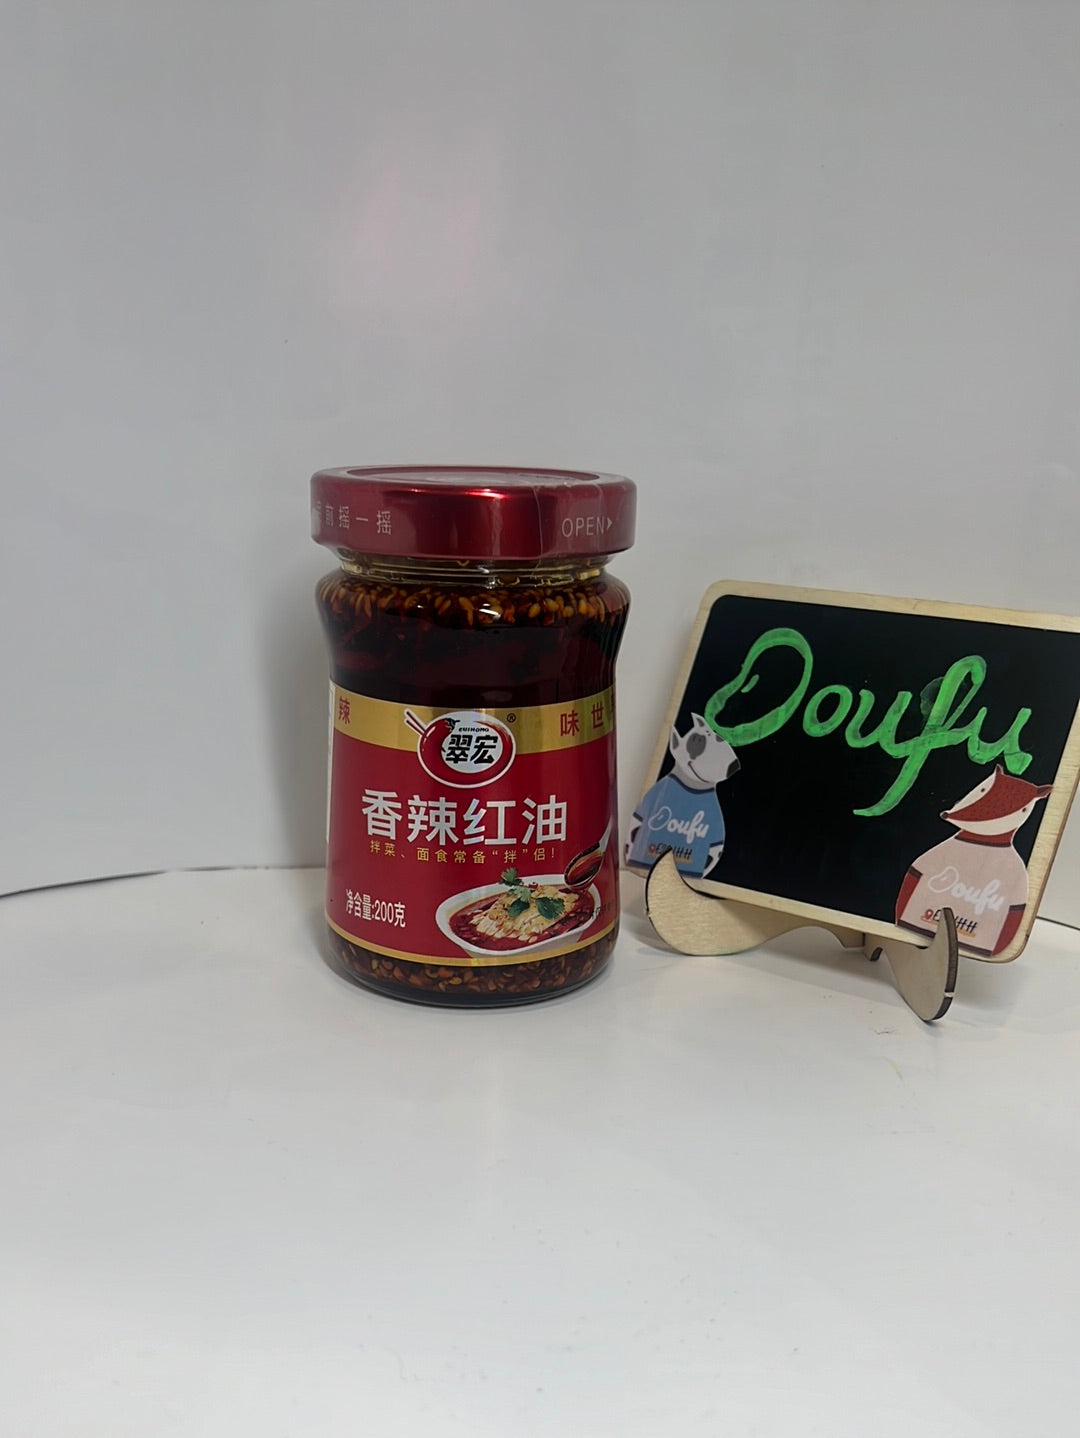 Cuihong Spicy Red Chili Oil 翠宏香辣红油 200g